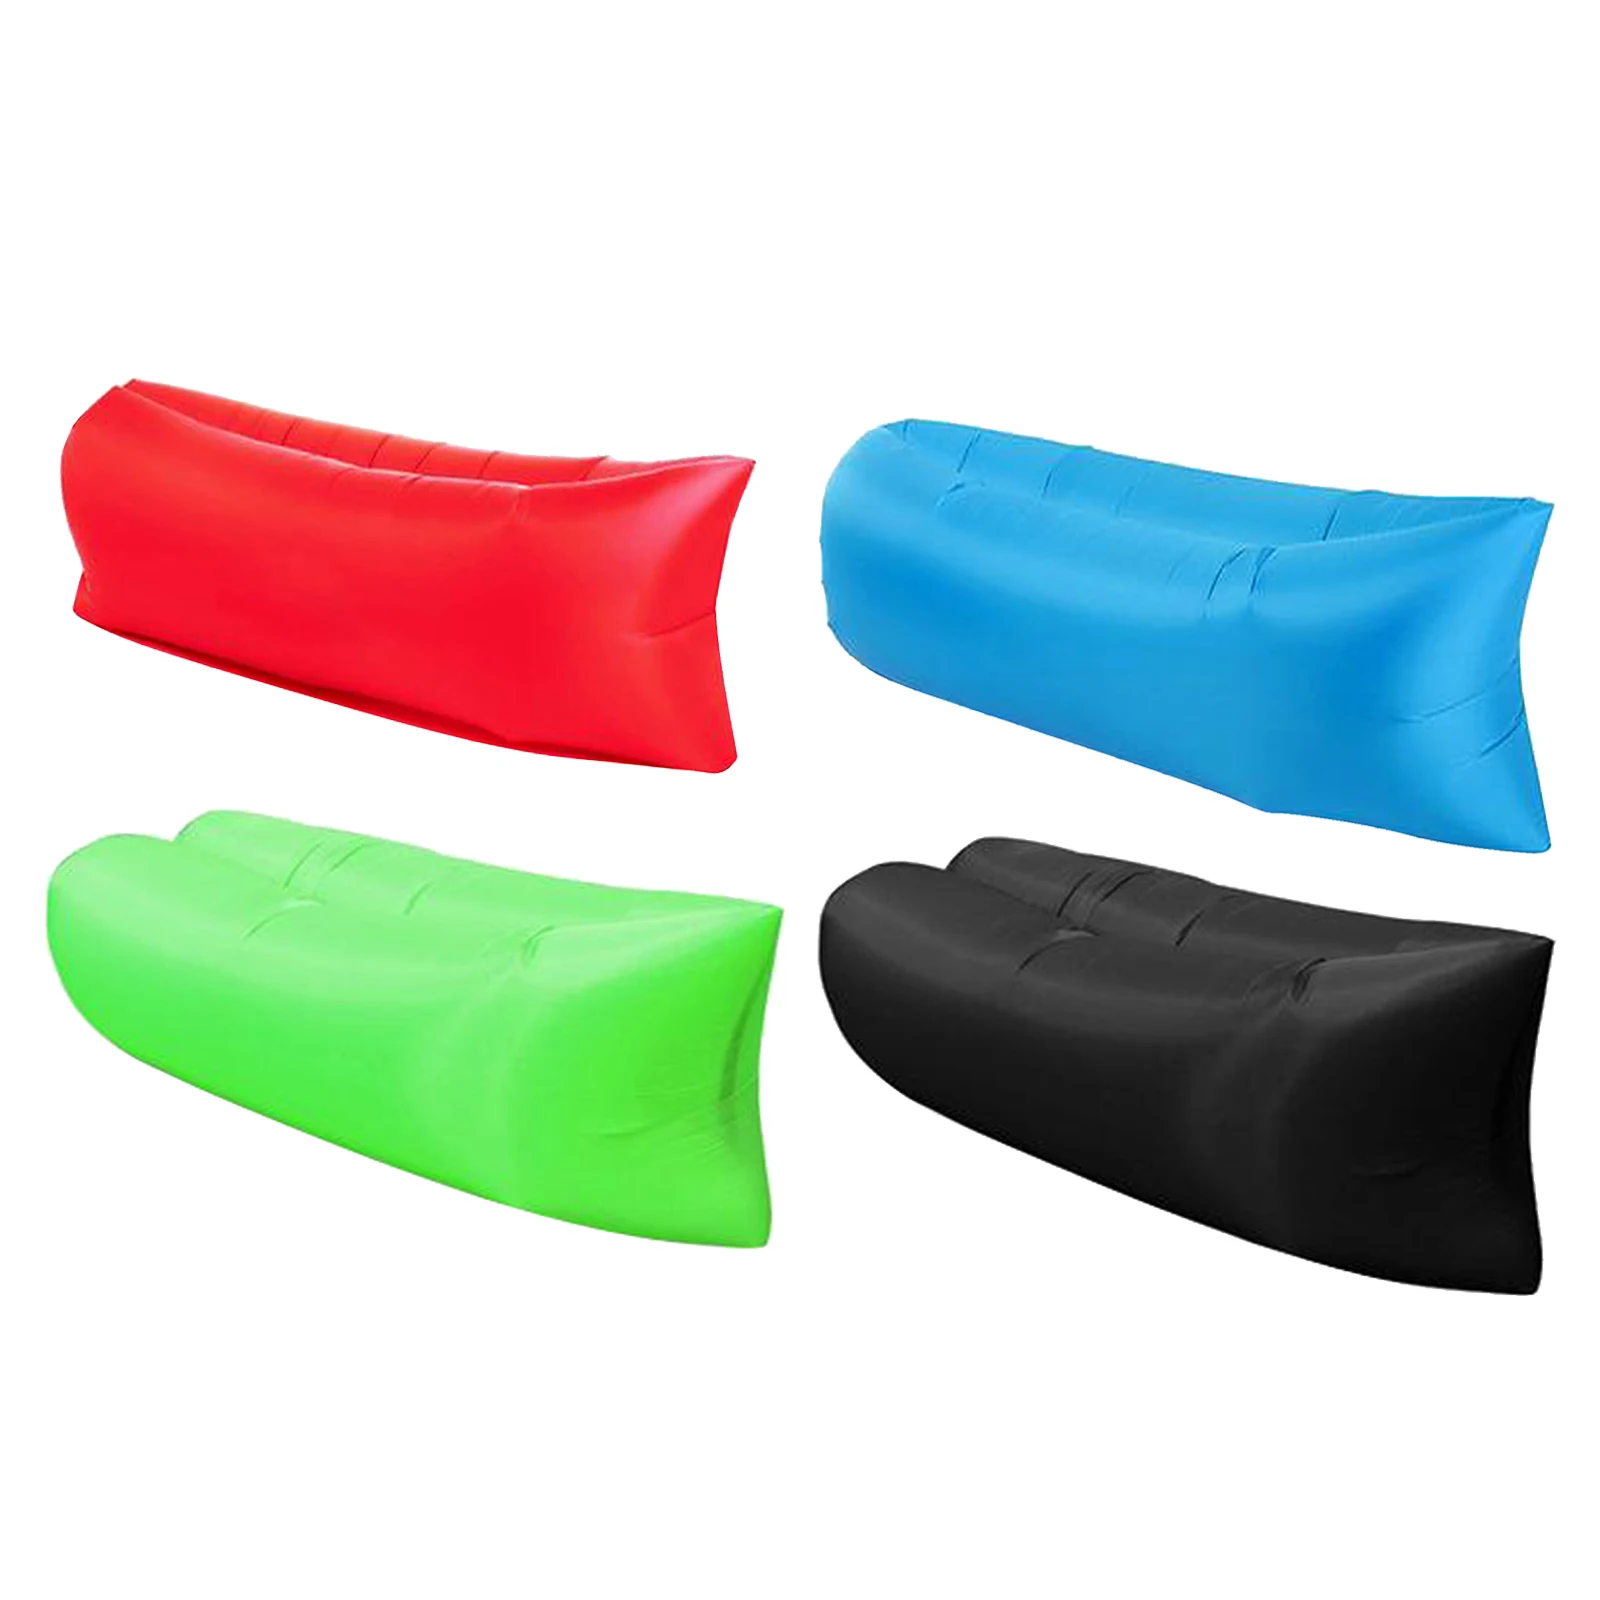 Camping Inflatable Lounger Air Sofa Portable Water Proof Anti-Air Leaking Couch for Pool Travel Hiking Lakeside Picnics Beach